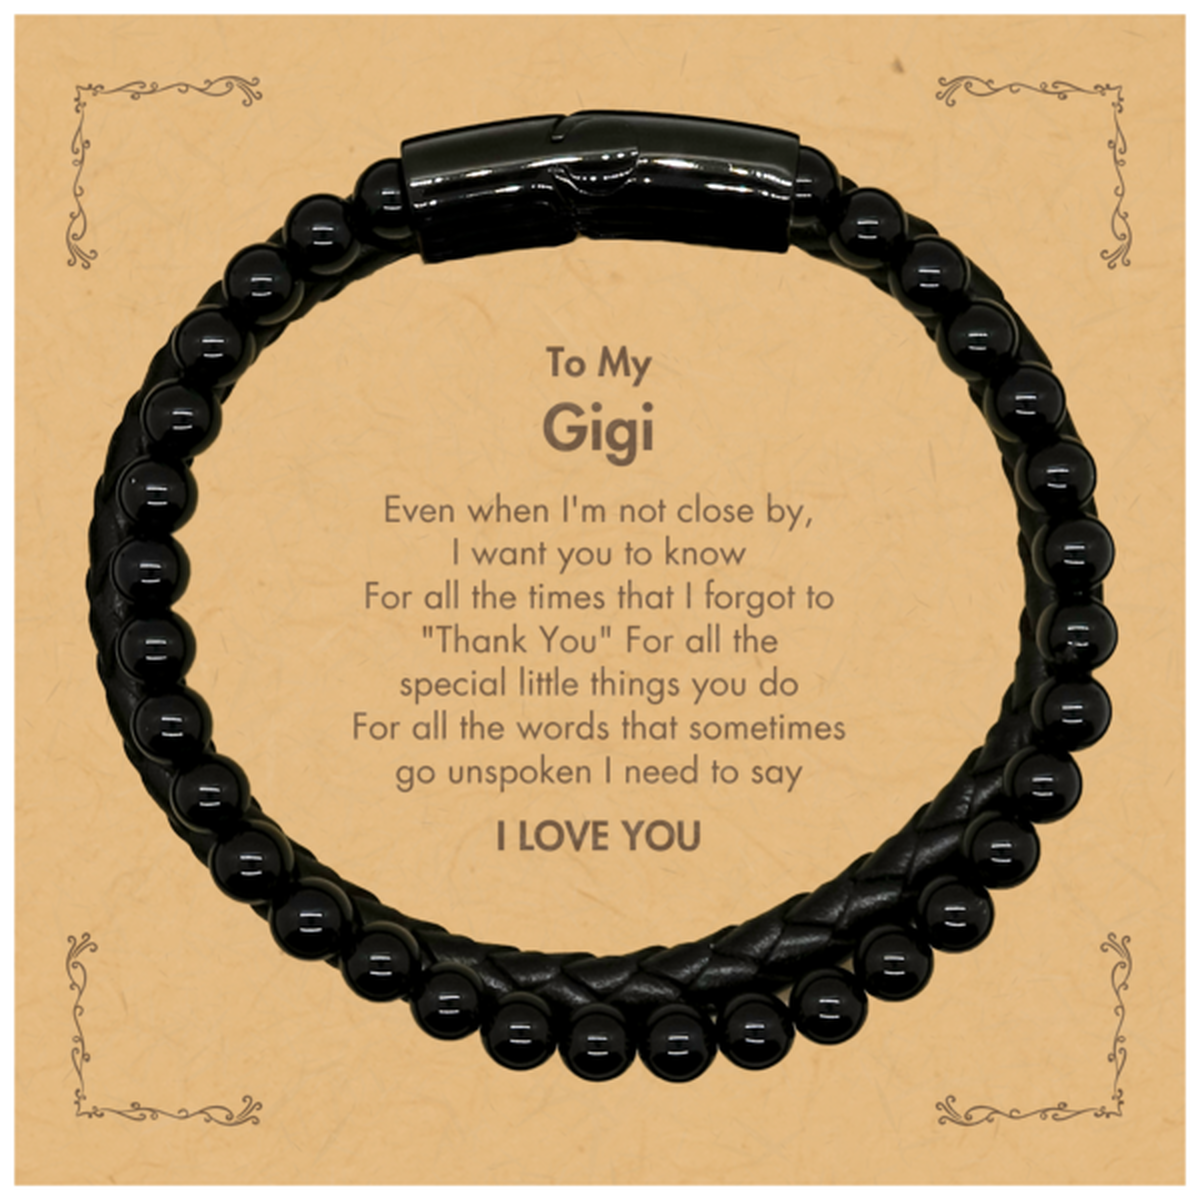 Thank You Gifts for Gigi, Keepsake Stone Leather Bracelets Gifts for Gigi Birthday Mother's day Father's Day Gigi For all the words That sometimes go unspoken I need to say I LOVE YOU